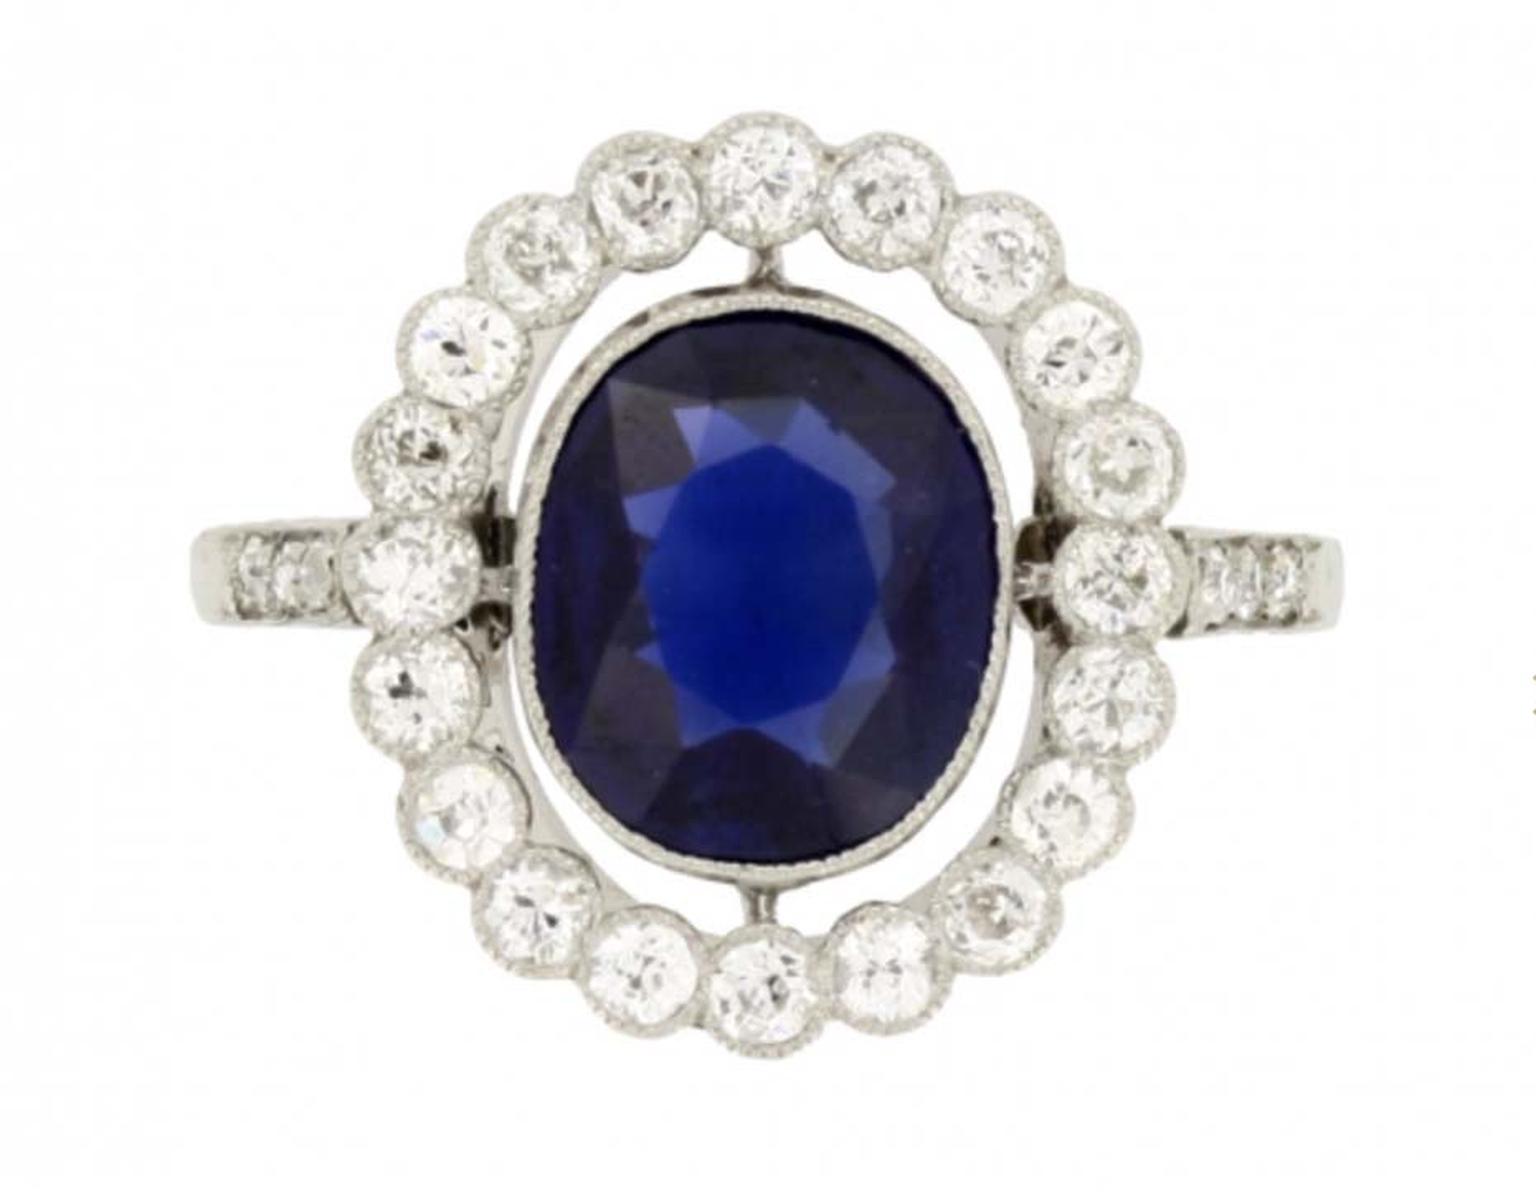 This Edwardian marquise sapphire and diamond cluster engagement ring circa 1910, available at Berganza, is set with a marquise shape, old-cut, natural unenhanced sapphire, encircled by a single row of round, old, single-cut diamonds of varying sizes, with